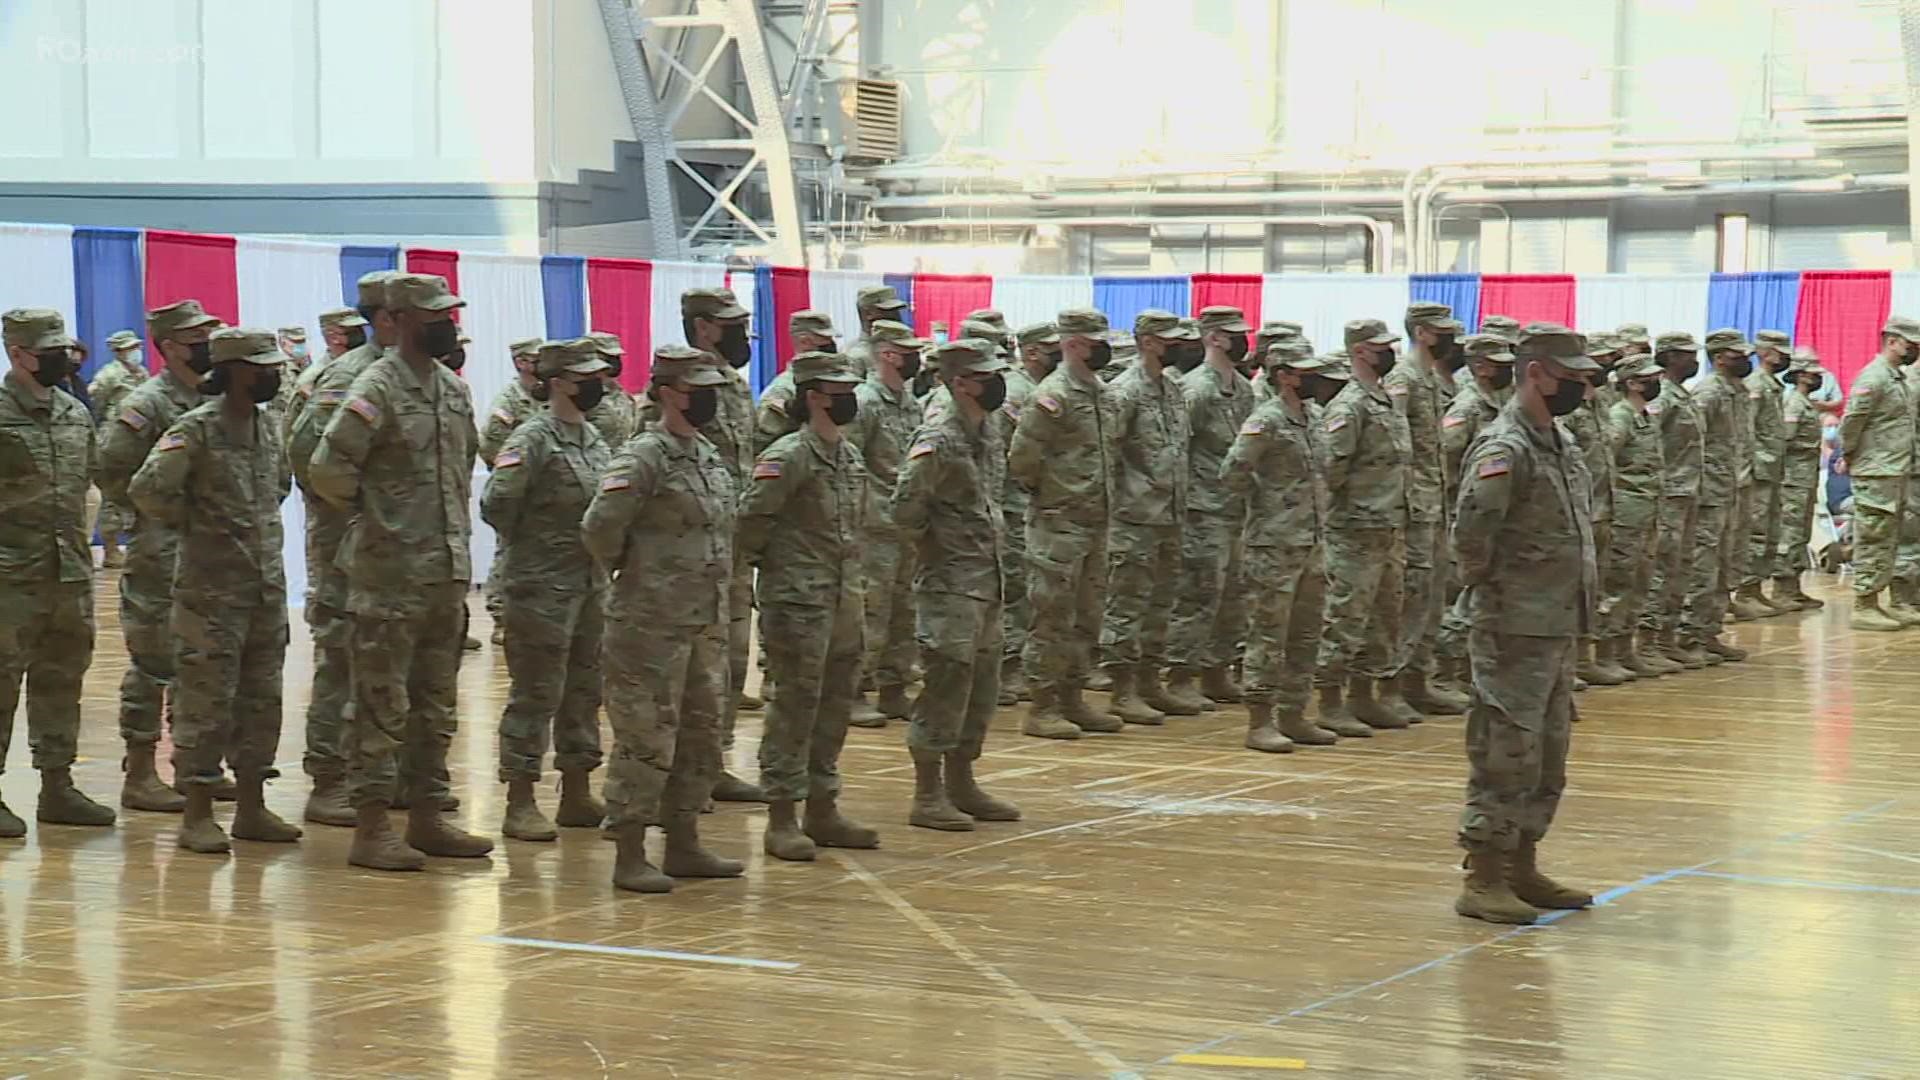 A send-off ceremony was held Sunday at the state armory in Hartford for the Danbury-based 142nd Area Support Medical Co.